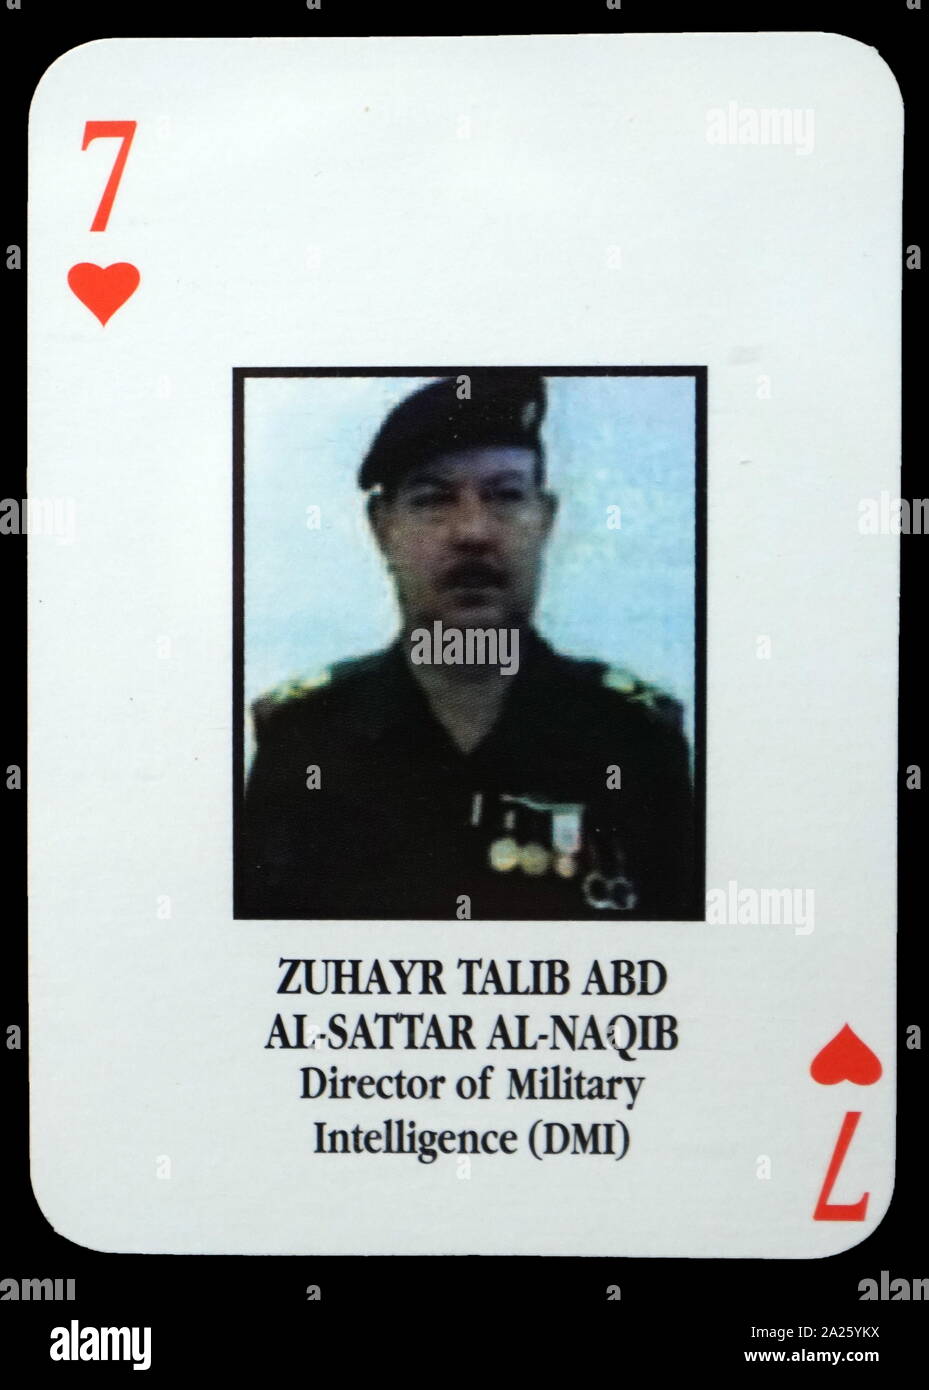 Most-wanted Iraqi playing cards - Zuhayr Talib Abd Al-Sattar Al-Naqib (Director of Military Intelligence (DMI). The U.S. military developed a set of playing cards to help troop identify the most-wanted members of President Saddam Hussein's government during the 2003 invasion of Iraq. Stock Photo